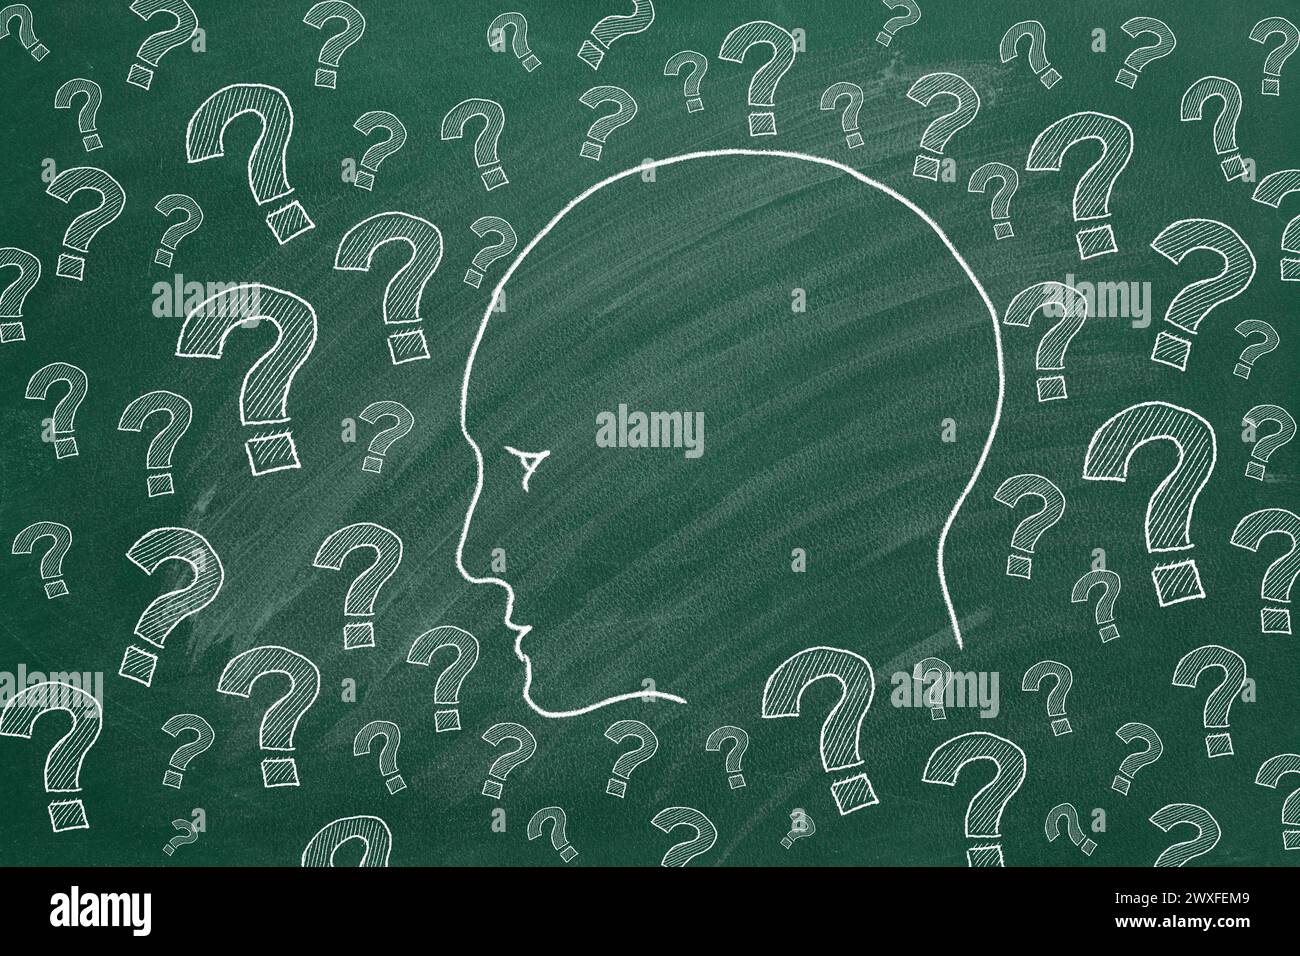 Human head with question marks. Illustration on greenboard. Stock Photo